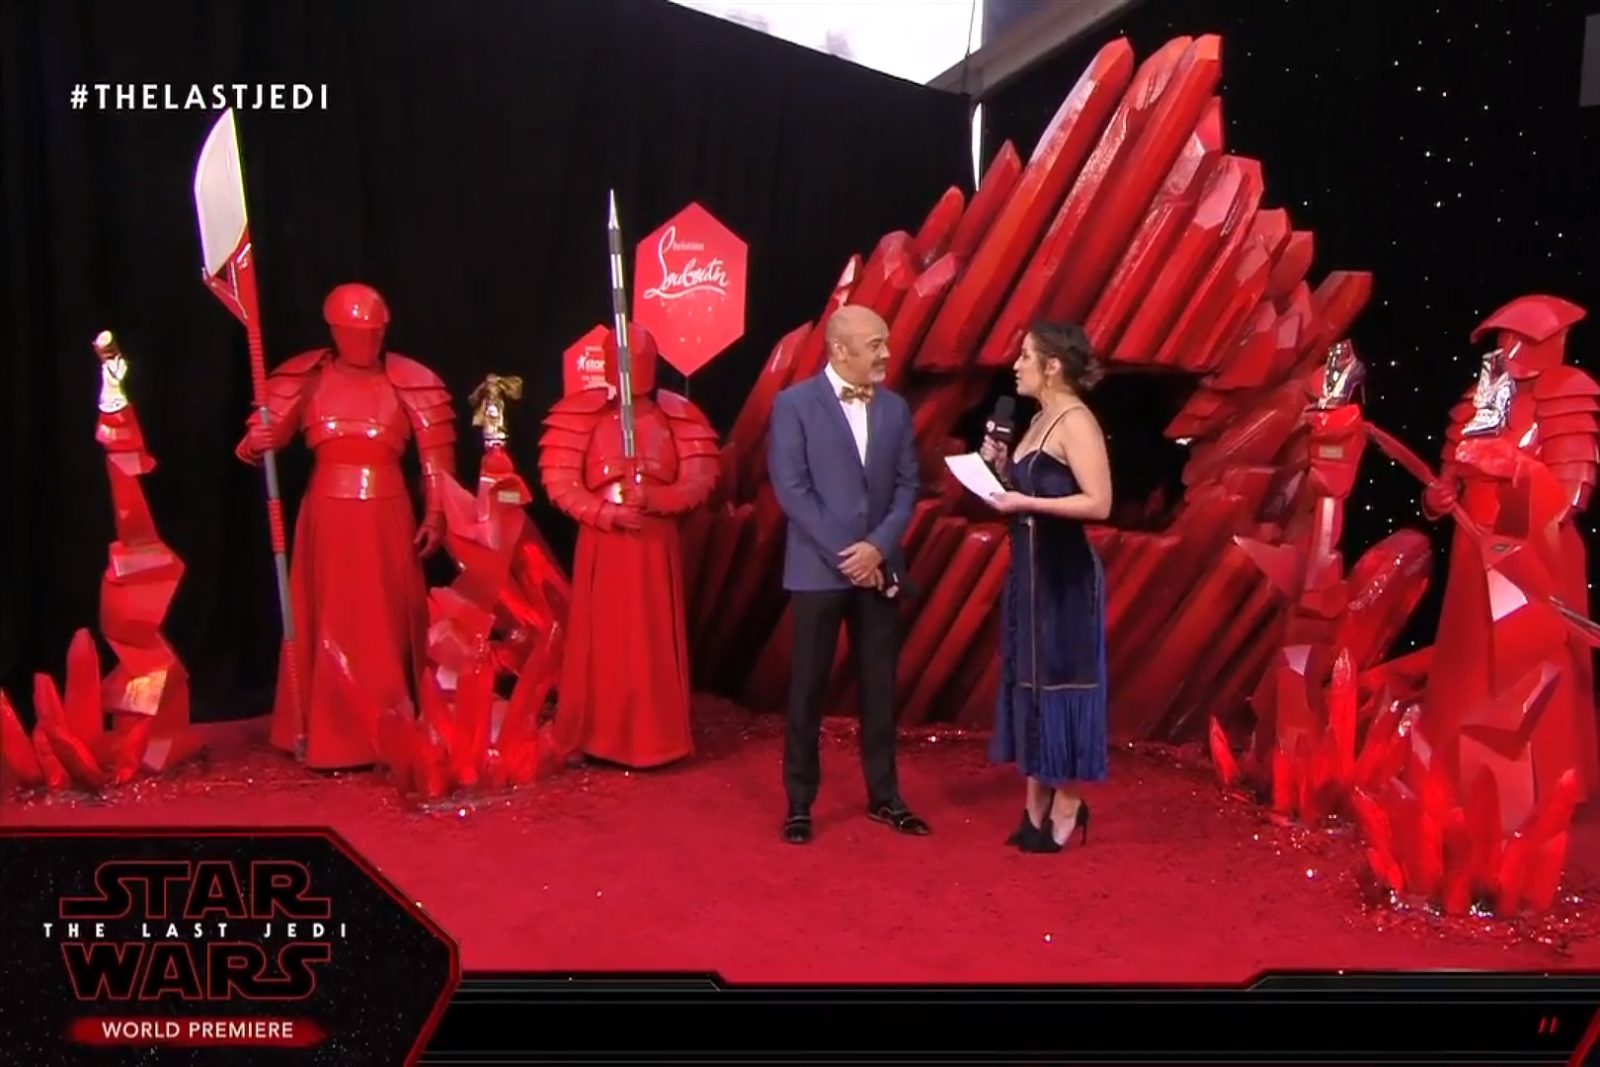 Christian Louboutin at the TLJ Premiere